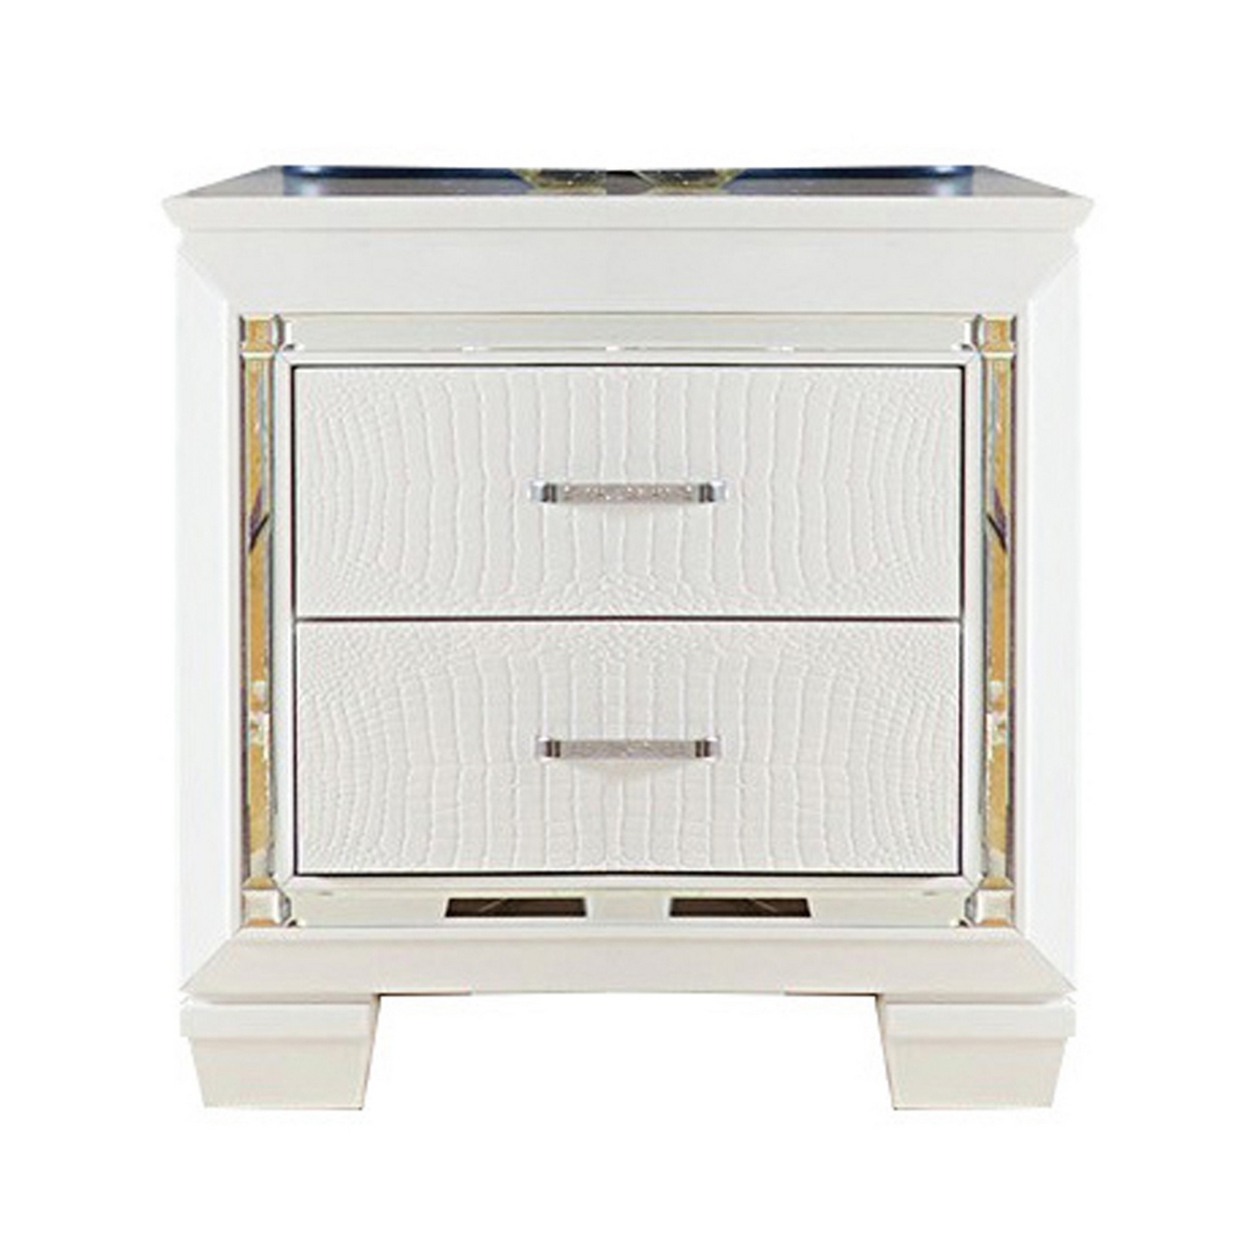 Contemporary Wooden Nightstand With 2 Drawers And LED Lighting, White- Saltoro Sherpi